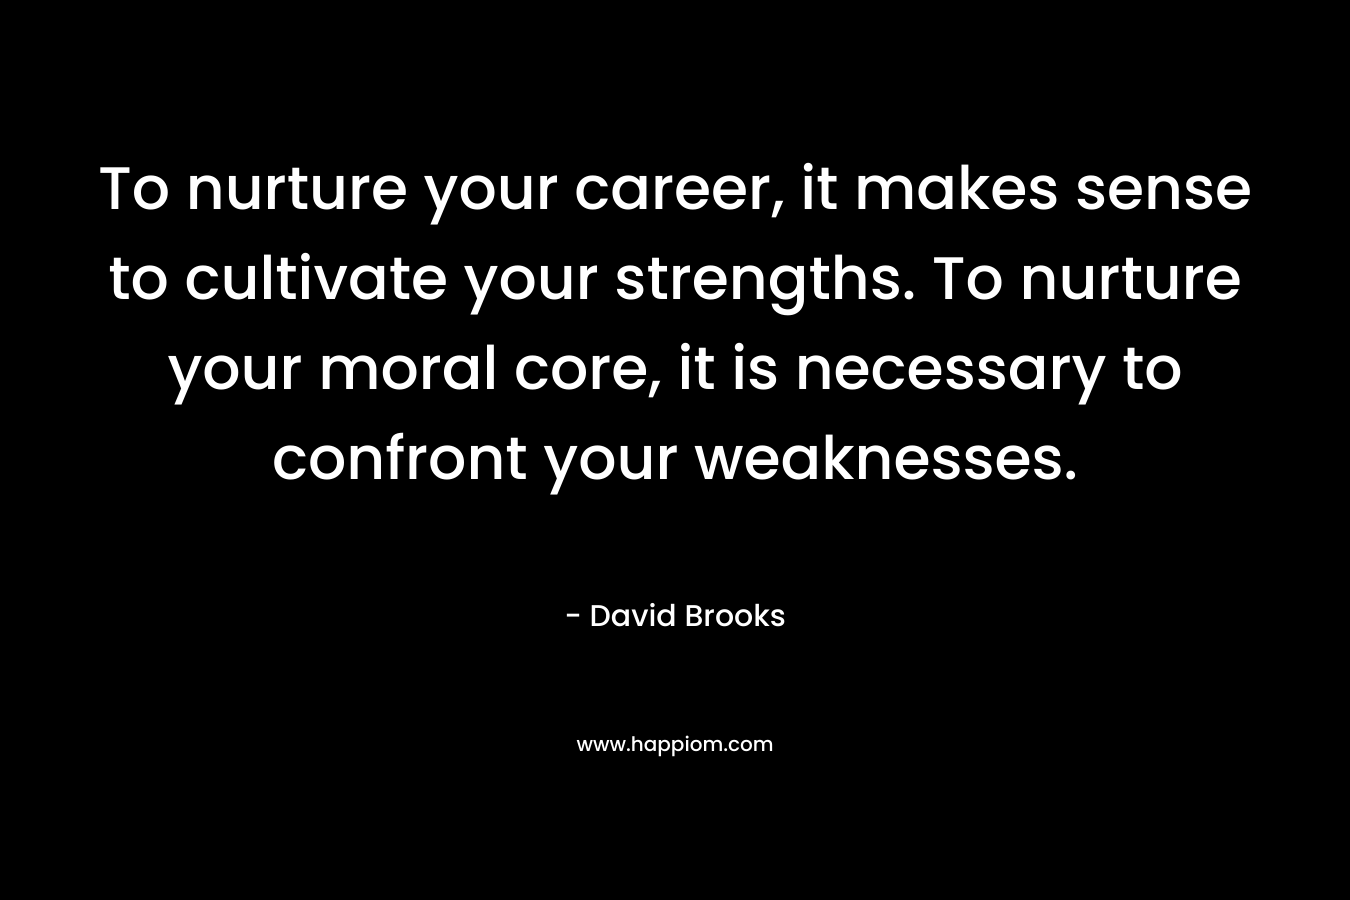 To nurture your career, it makes sense to cultivate your strengths. To nurture your moral core, it is necessary to confront your weaknesses.